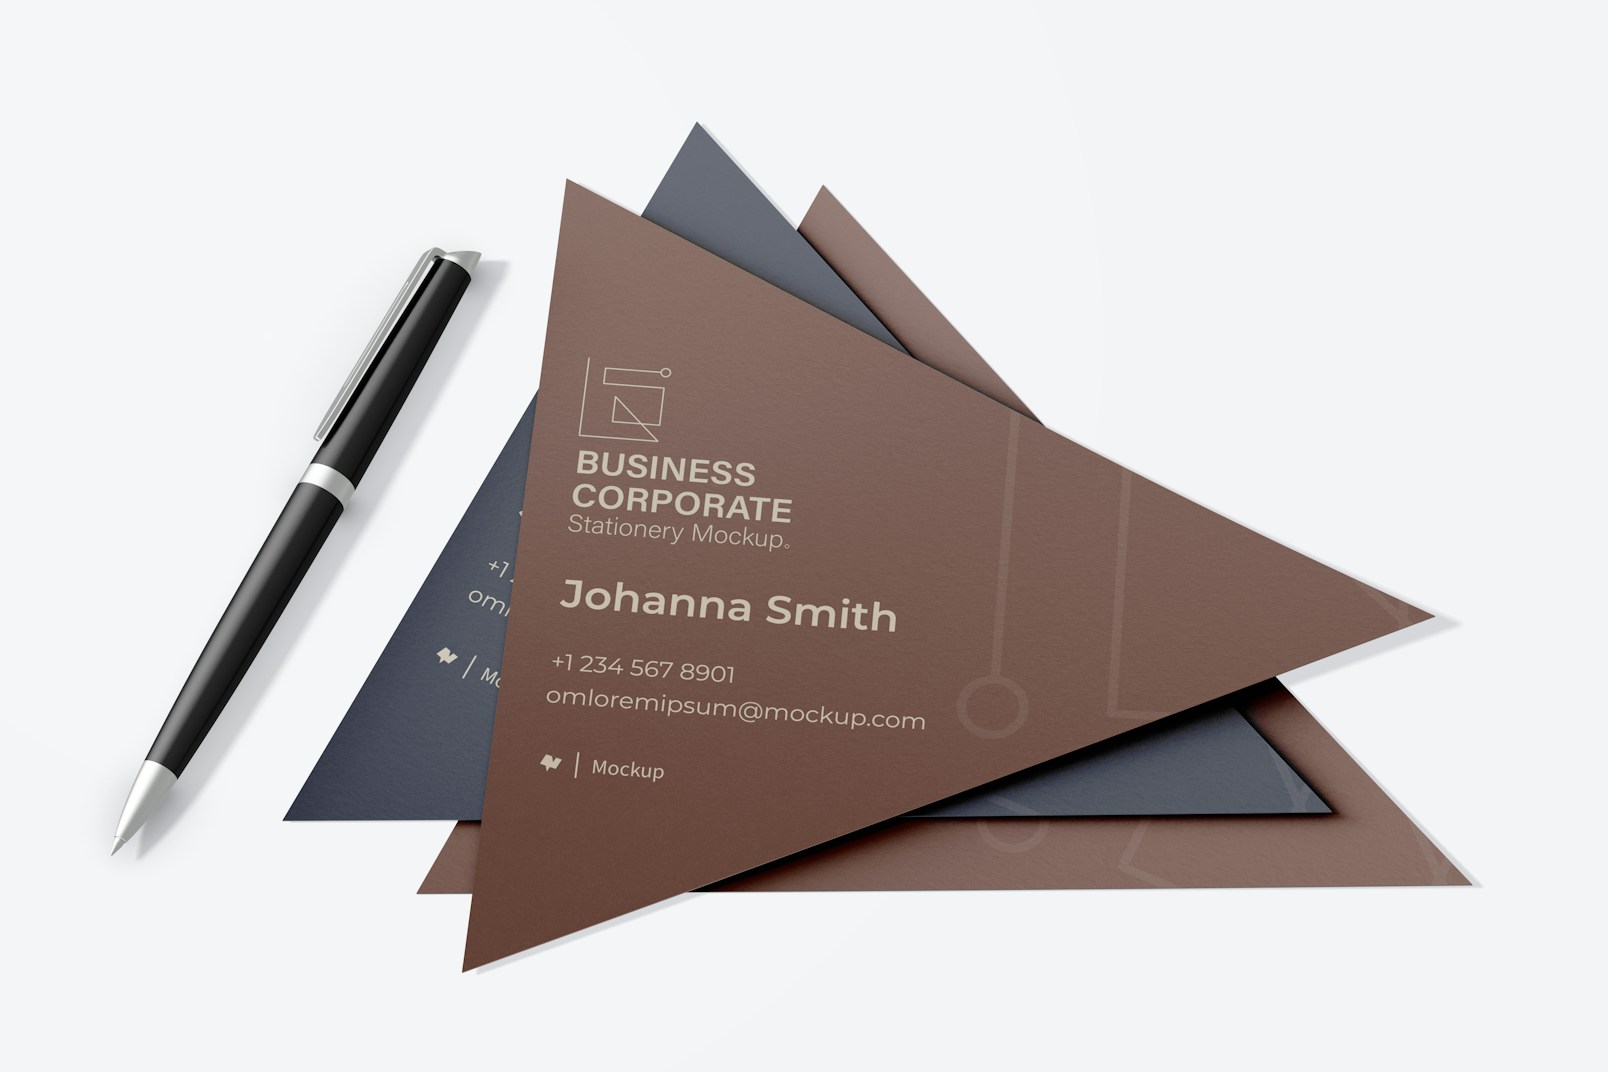 Hotel Business Cards Mockup, with Pen